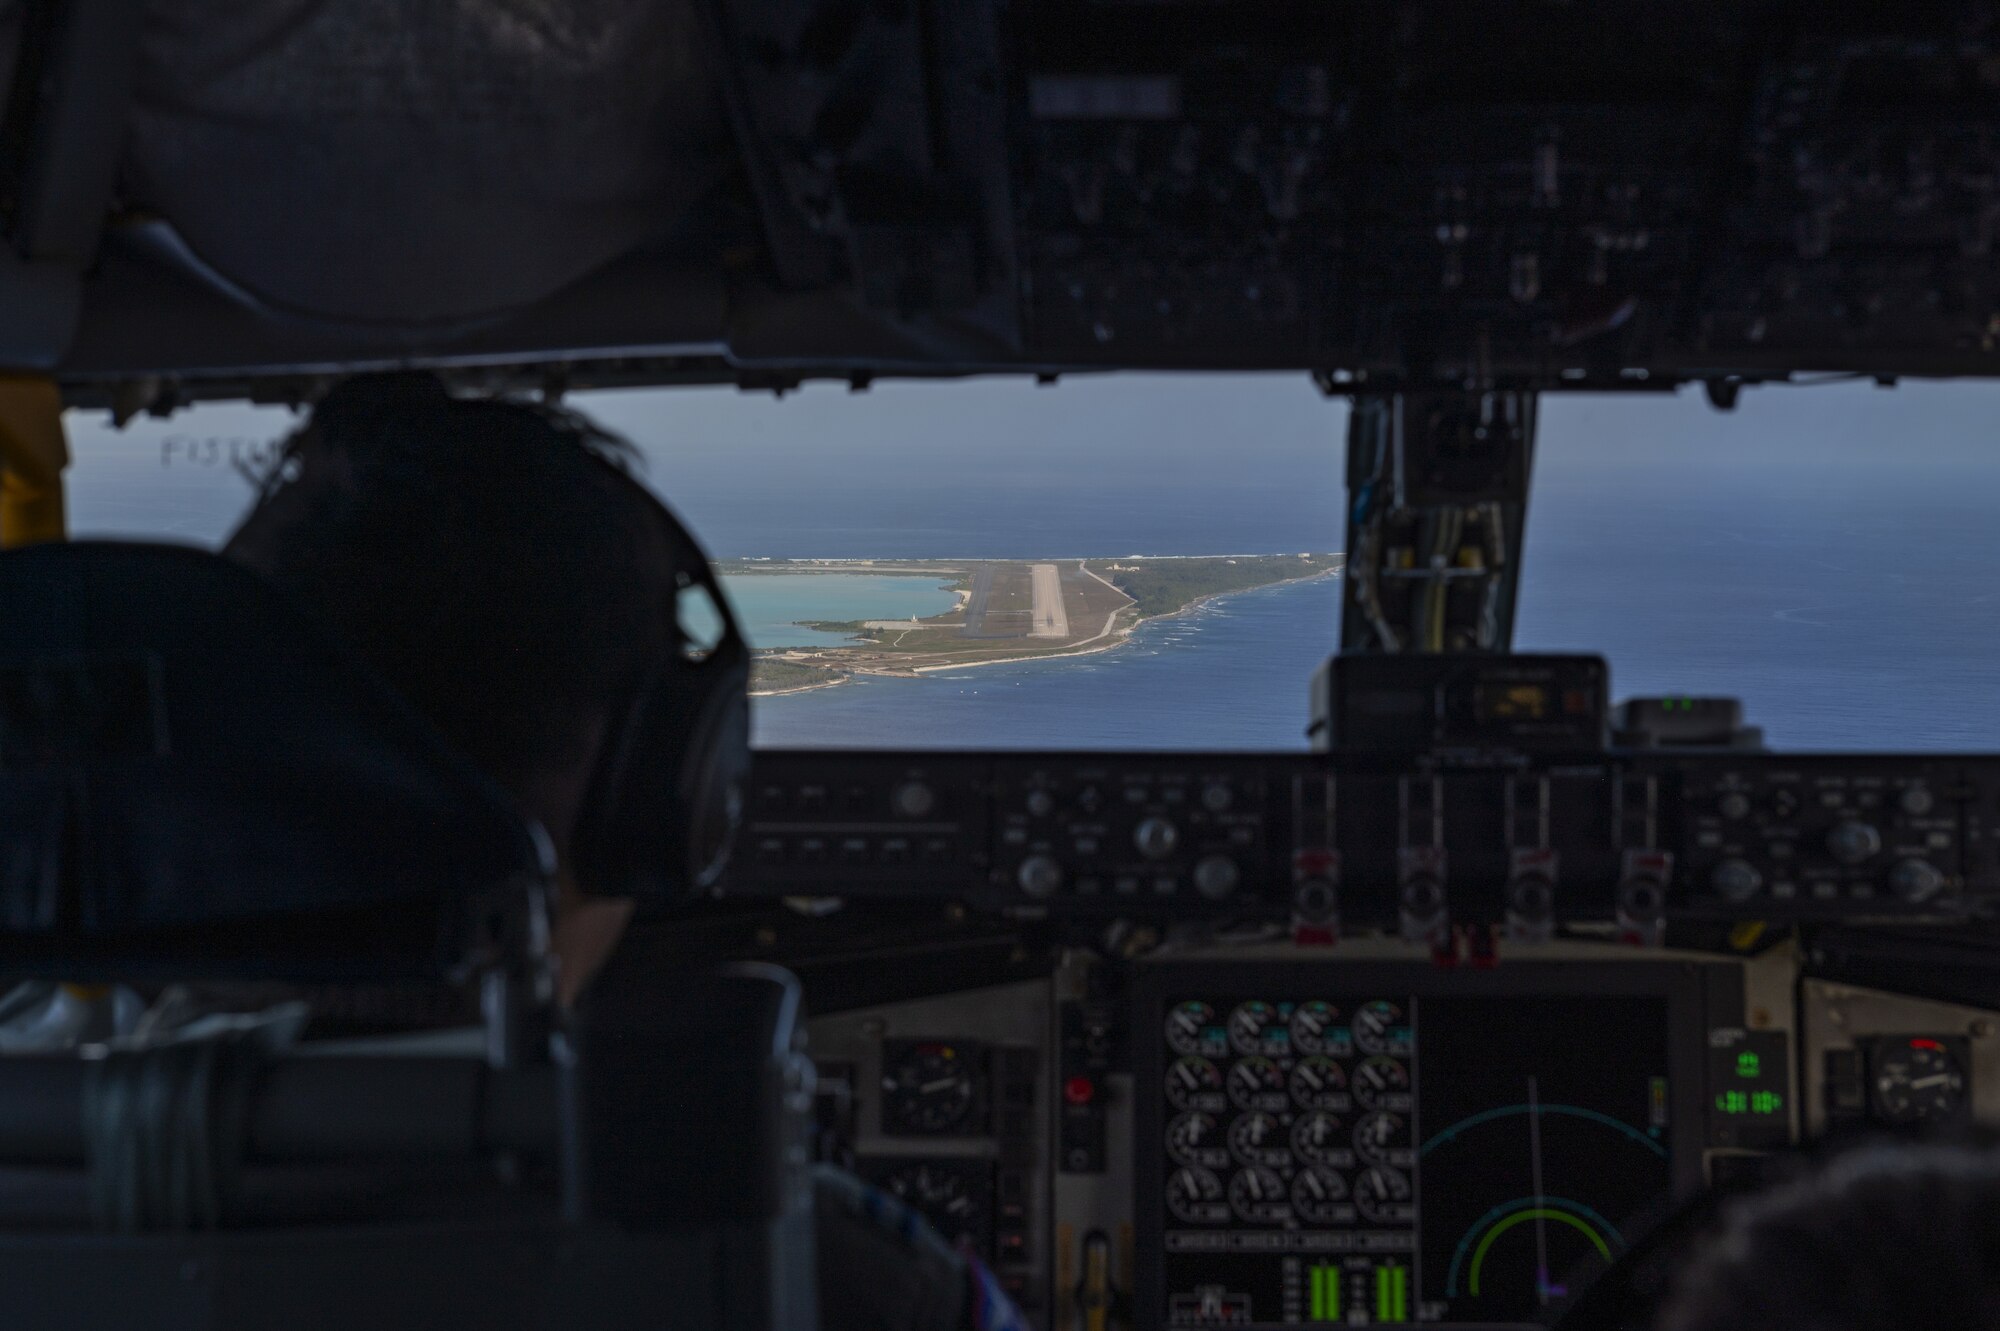 U.S. Air Force Capt. Jason Douglas, 384th Air Refueling Squadron pilot, prepares to land at Wake Island following an air refueling coronet mission with U.S. Marine Corps F/A-18C Hornets, March 9, 2023. Aircrew from the 384th Air Refueling Squadron conducted an air refueling coronet with Marines from the Marine Fighter Attack Squadron 312, demonstrating the critical role mobility forces have in projecting the joint force anywhere, anytime. (U.S. Air Force photo by Staff Sgt. Lawrence Sena)